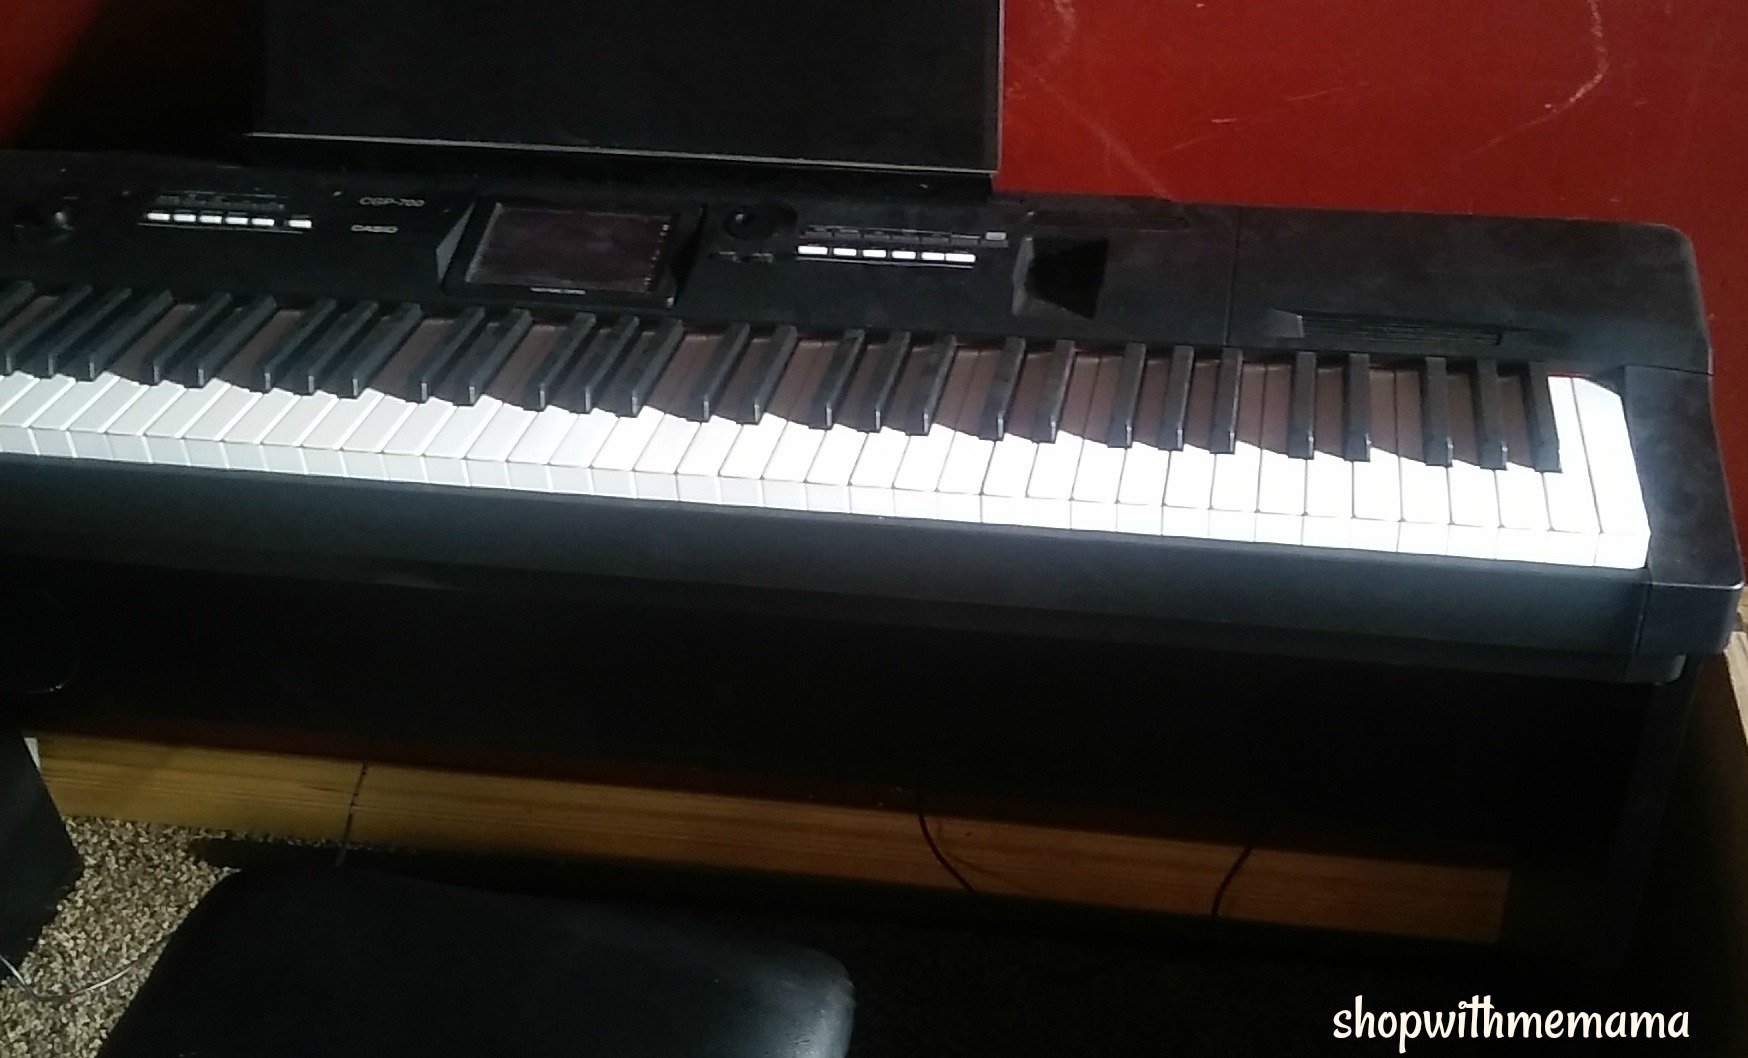 Casio’s Compact Grand Piano Is Awesome!